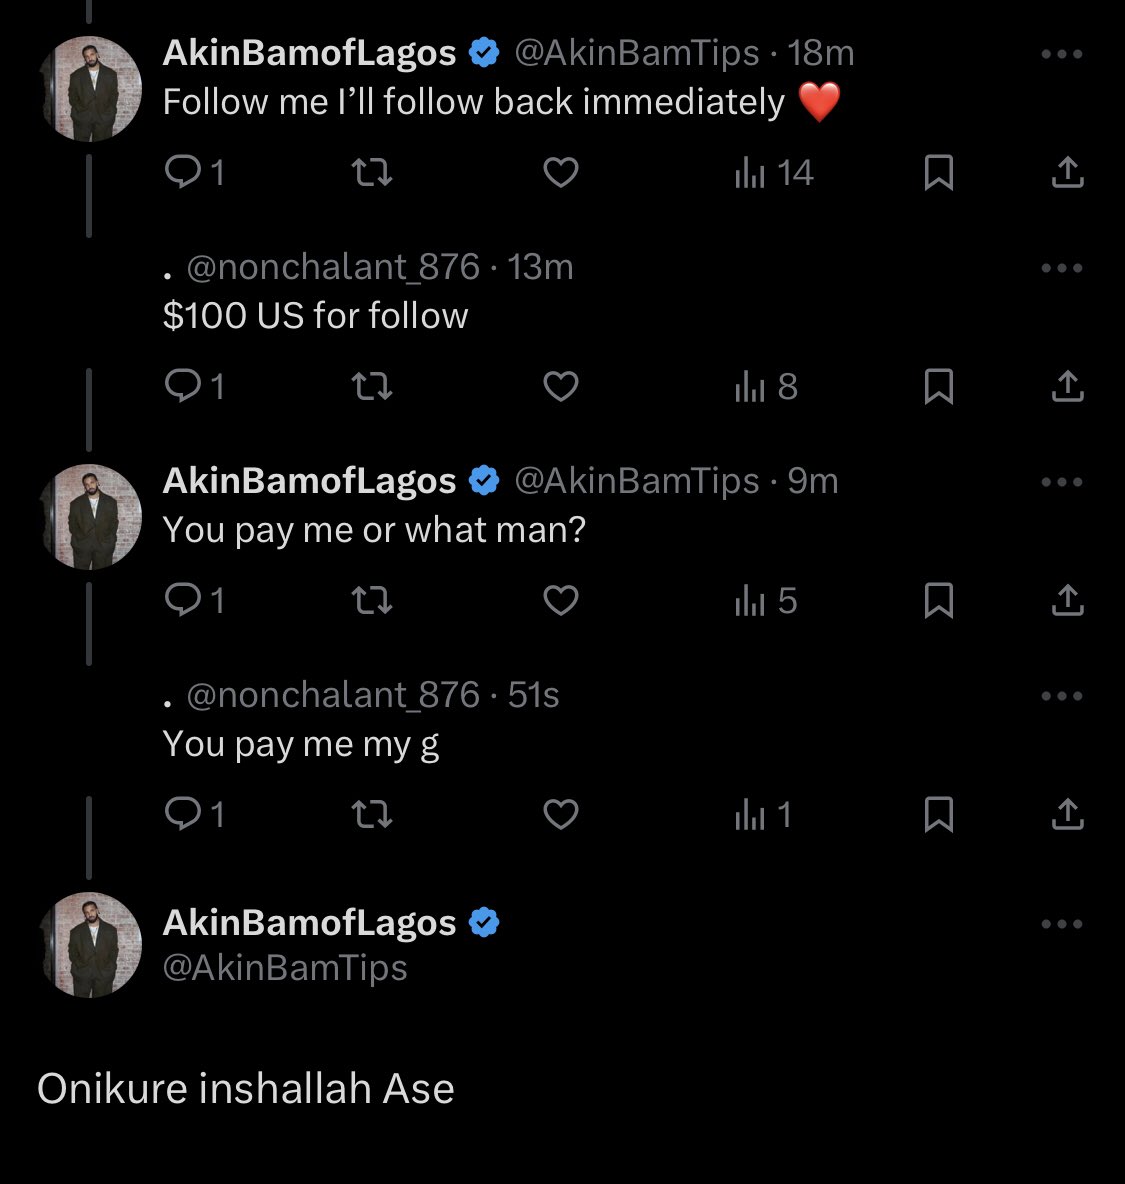 Lol one abroad guy say I go pay 100$ to get a follow back 😂